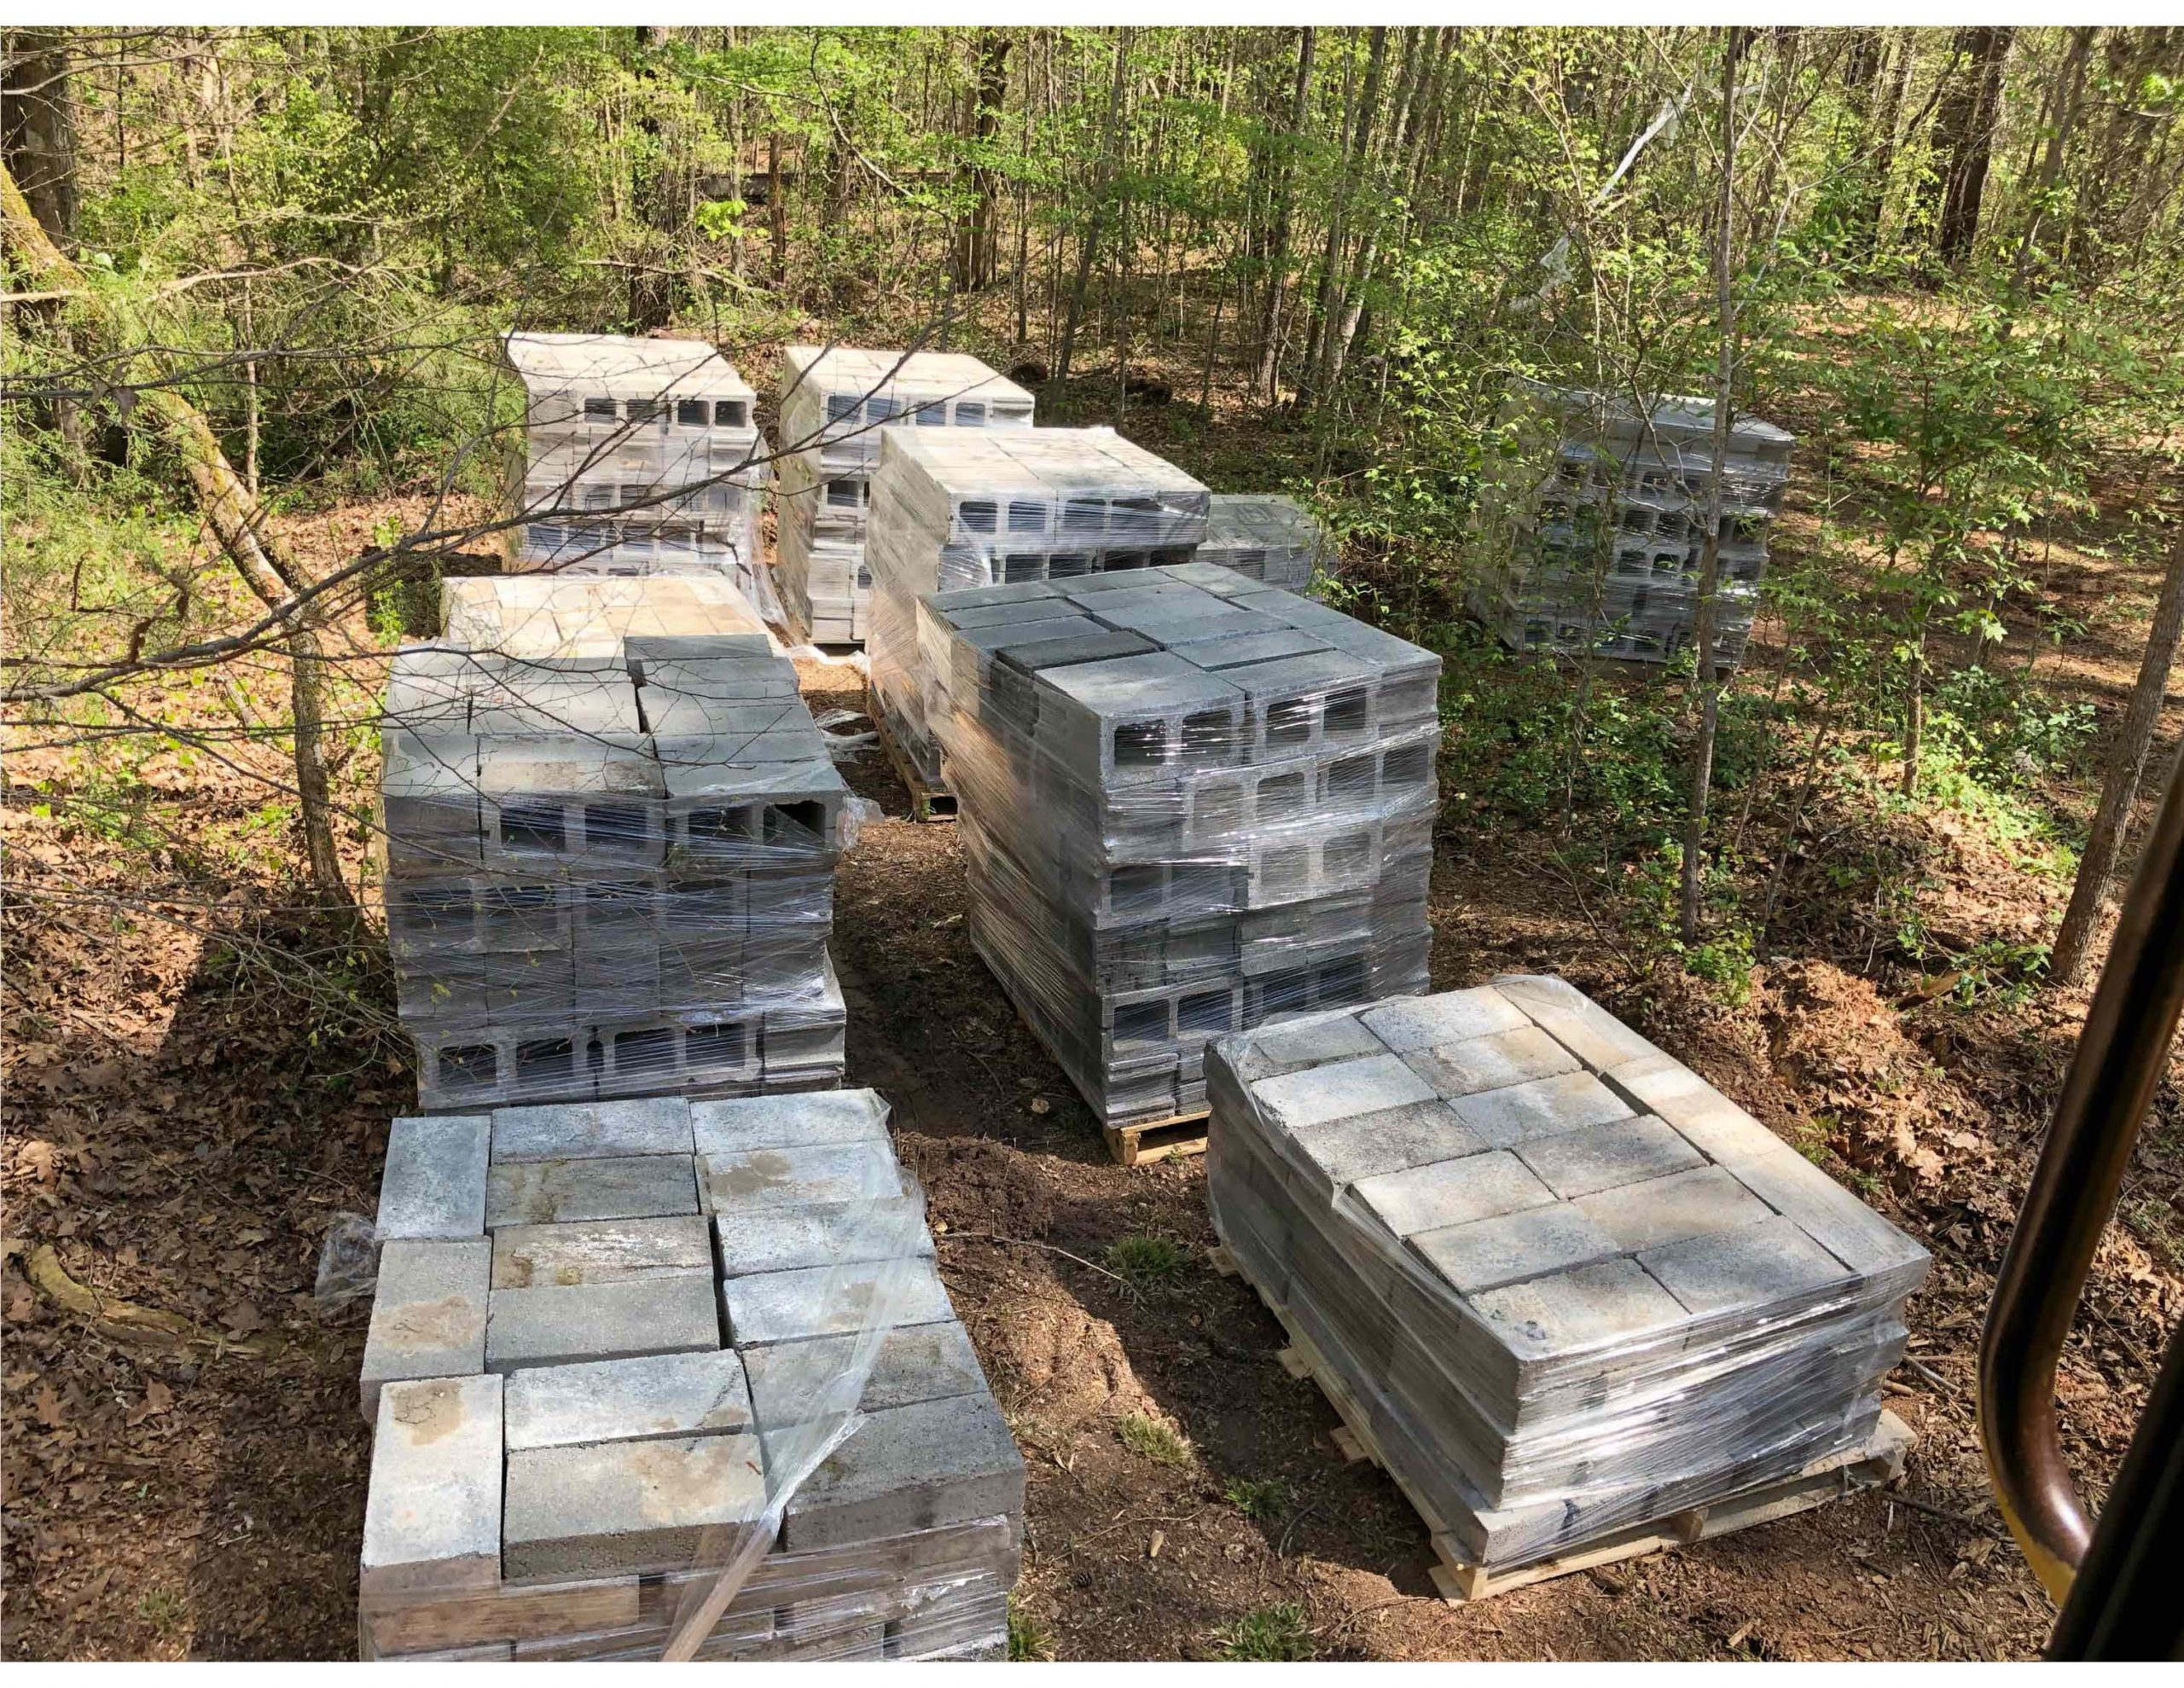 Pallets of blocks and bricks for donation